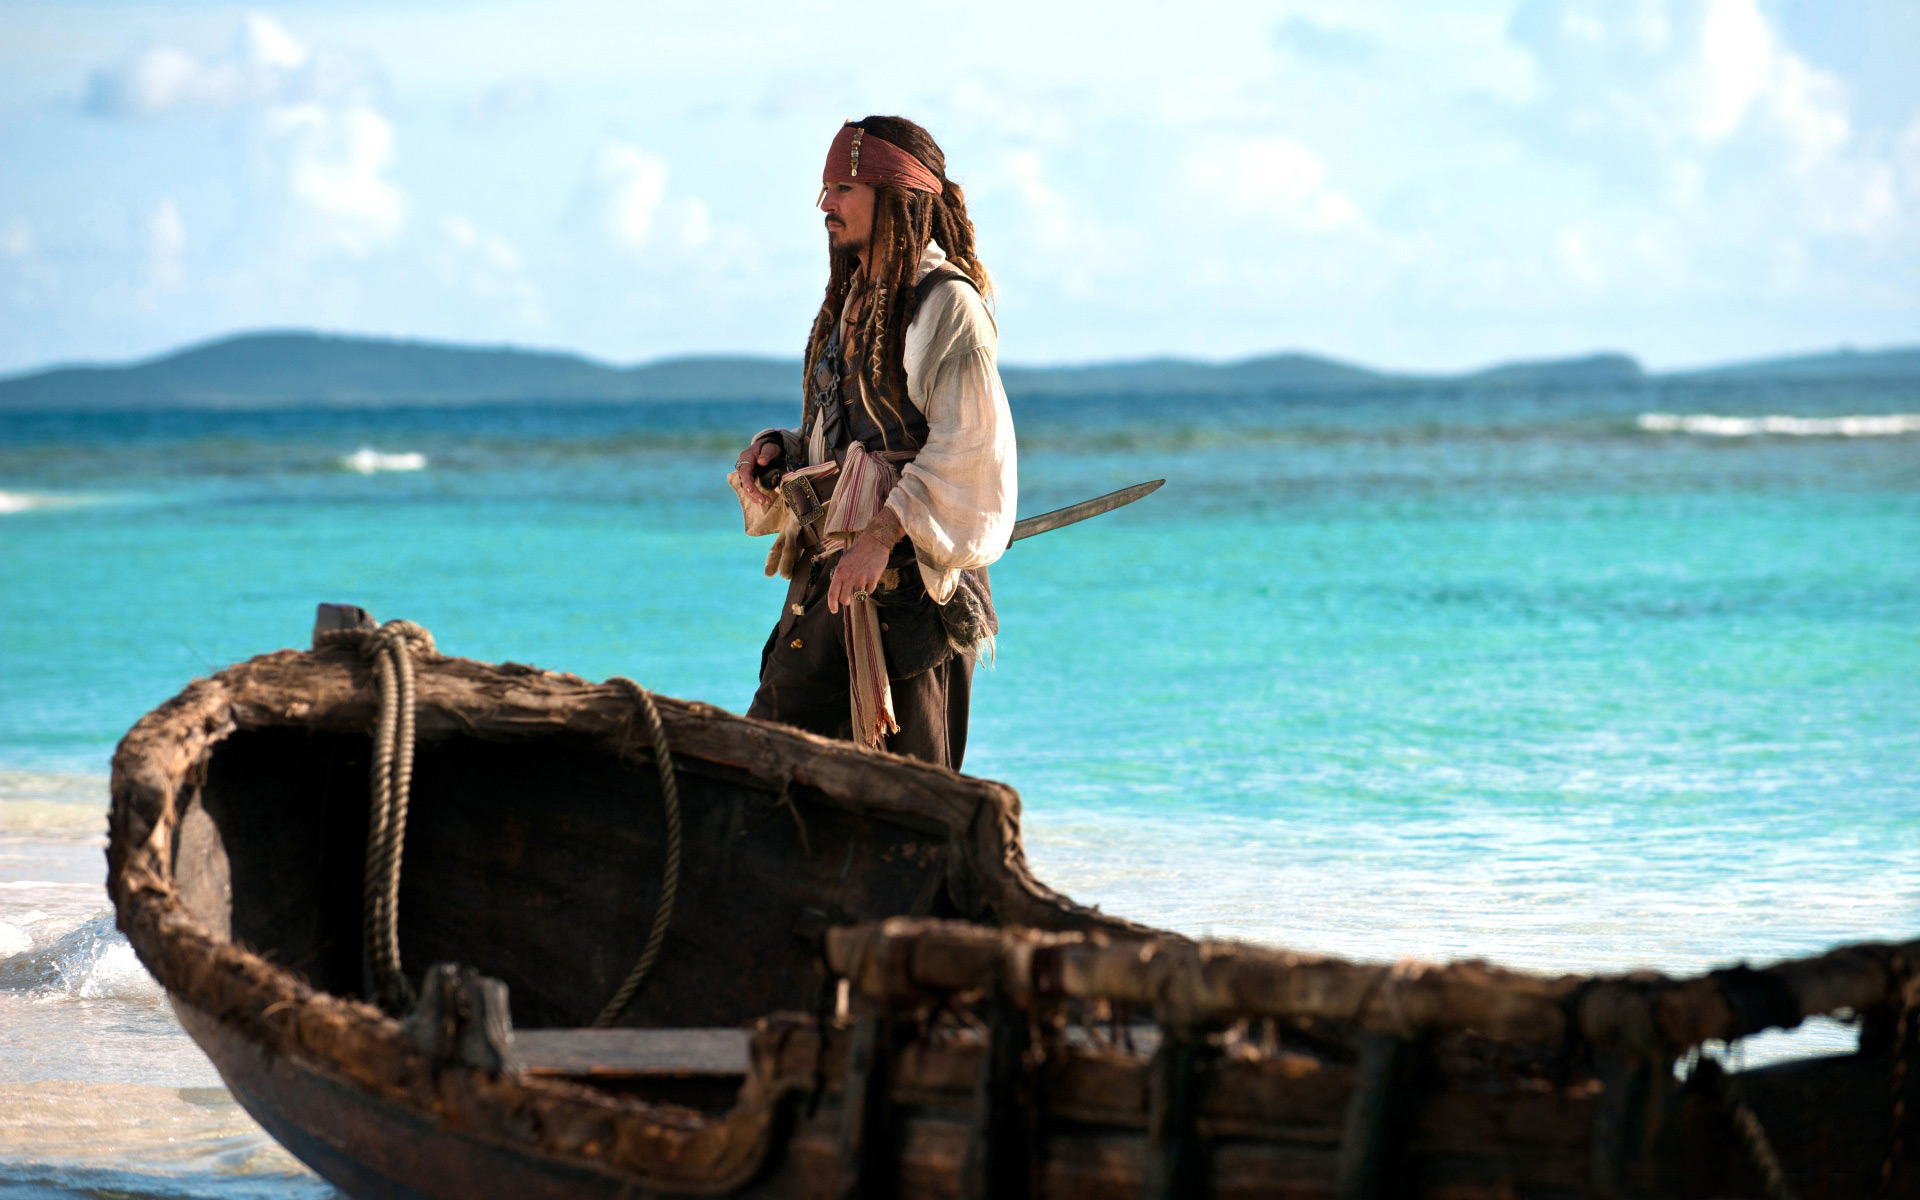 jack sparrow, movie, pirates of the caribbean, johnny depp High Definition image